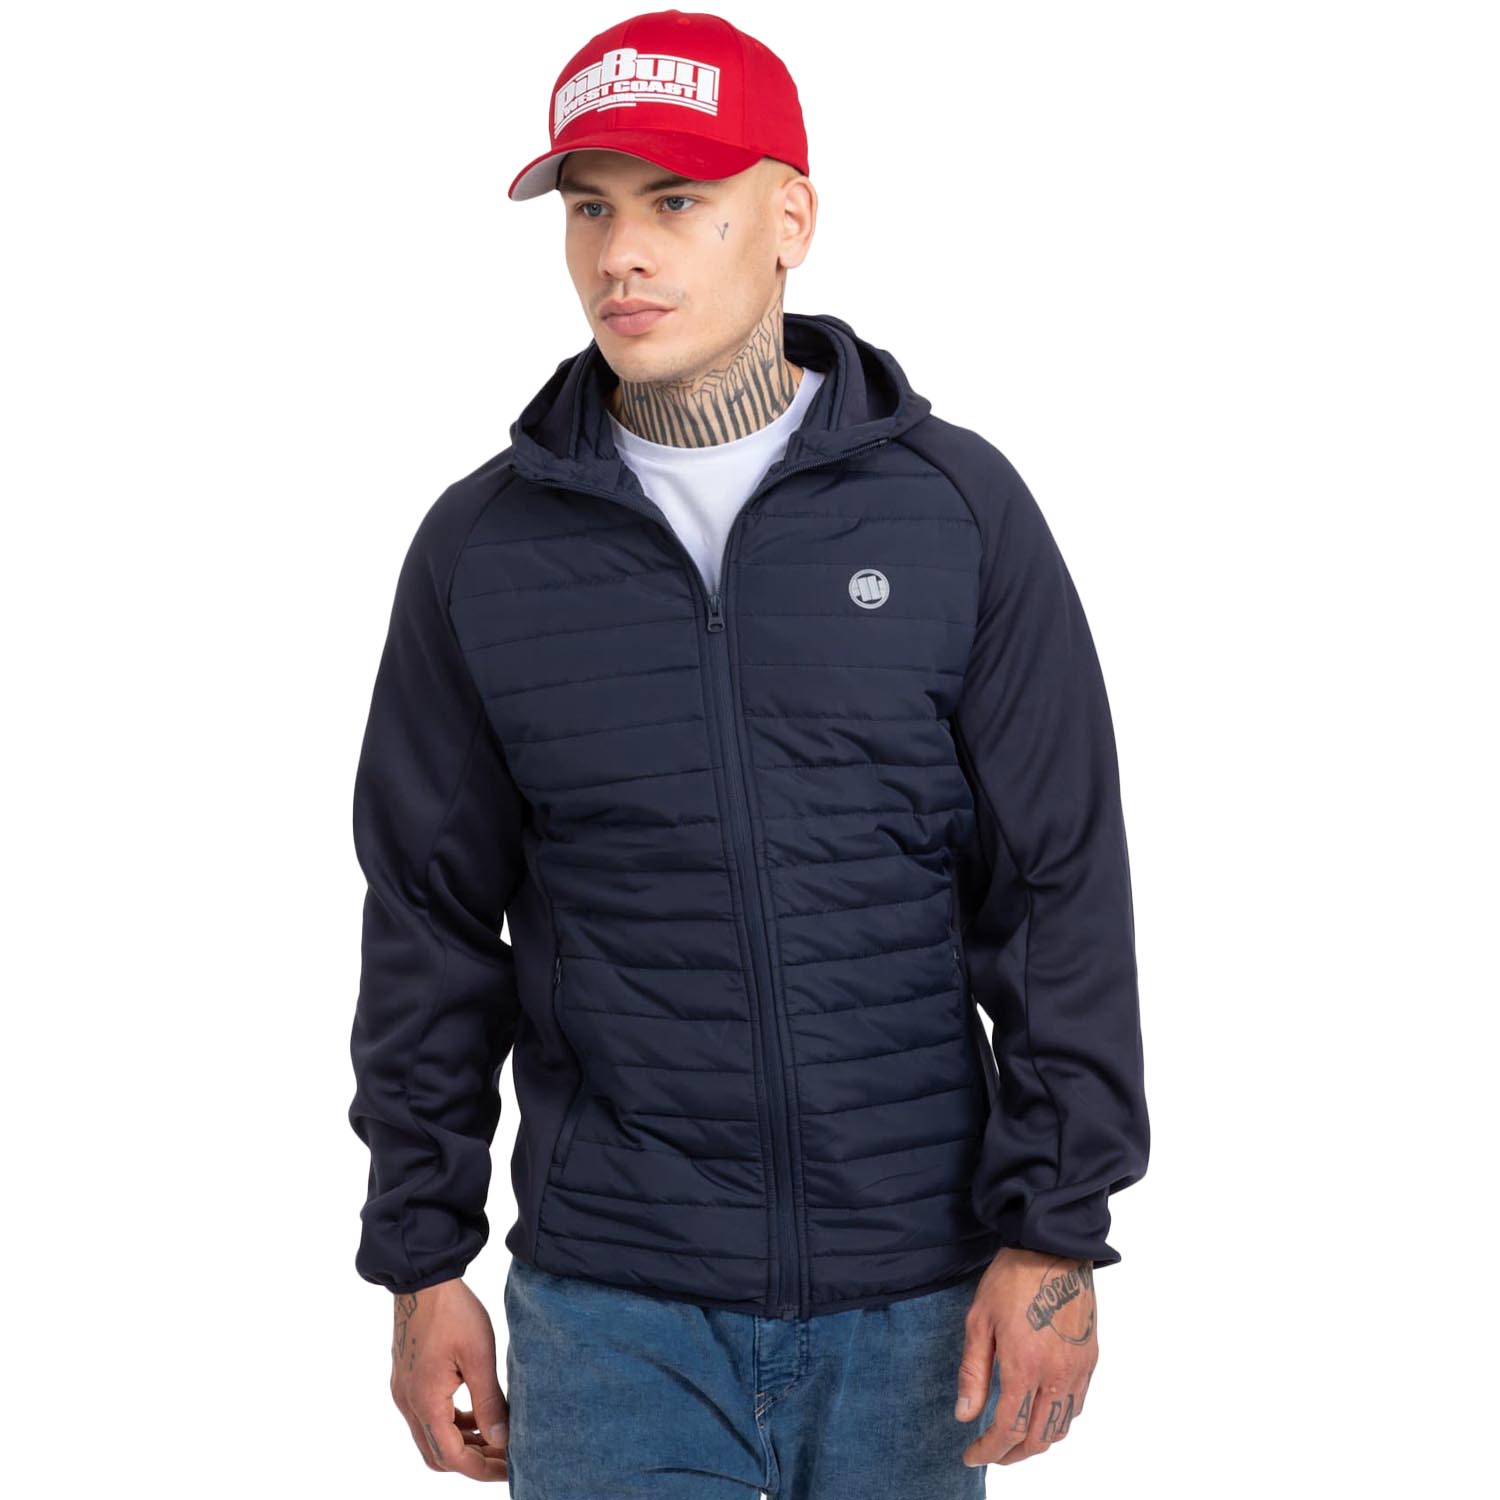 Pit Bull West Coast Jacke, Pacific, navy, S